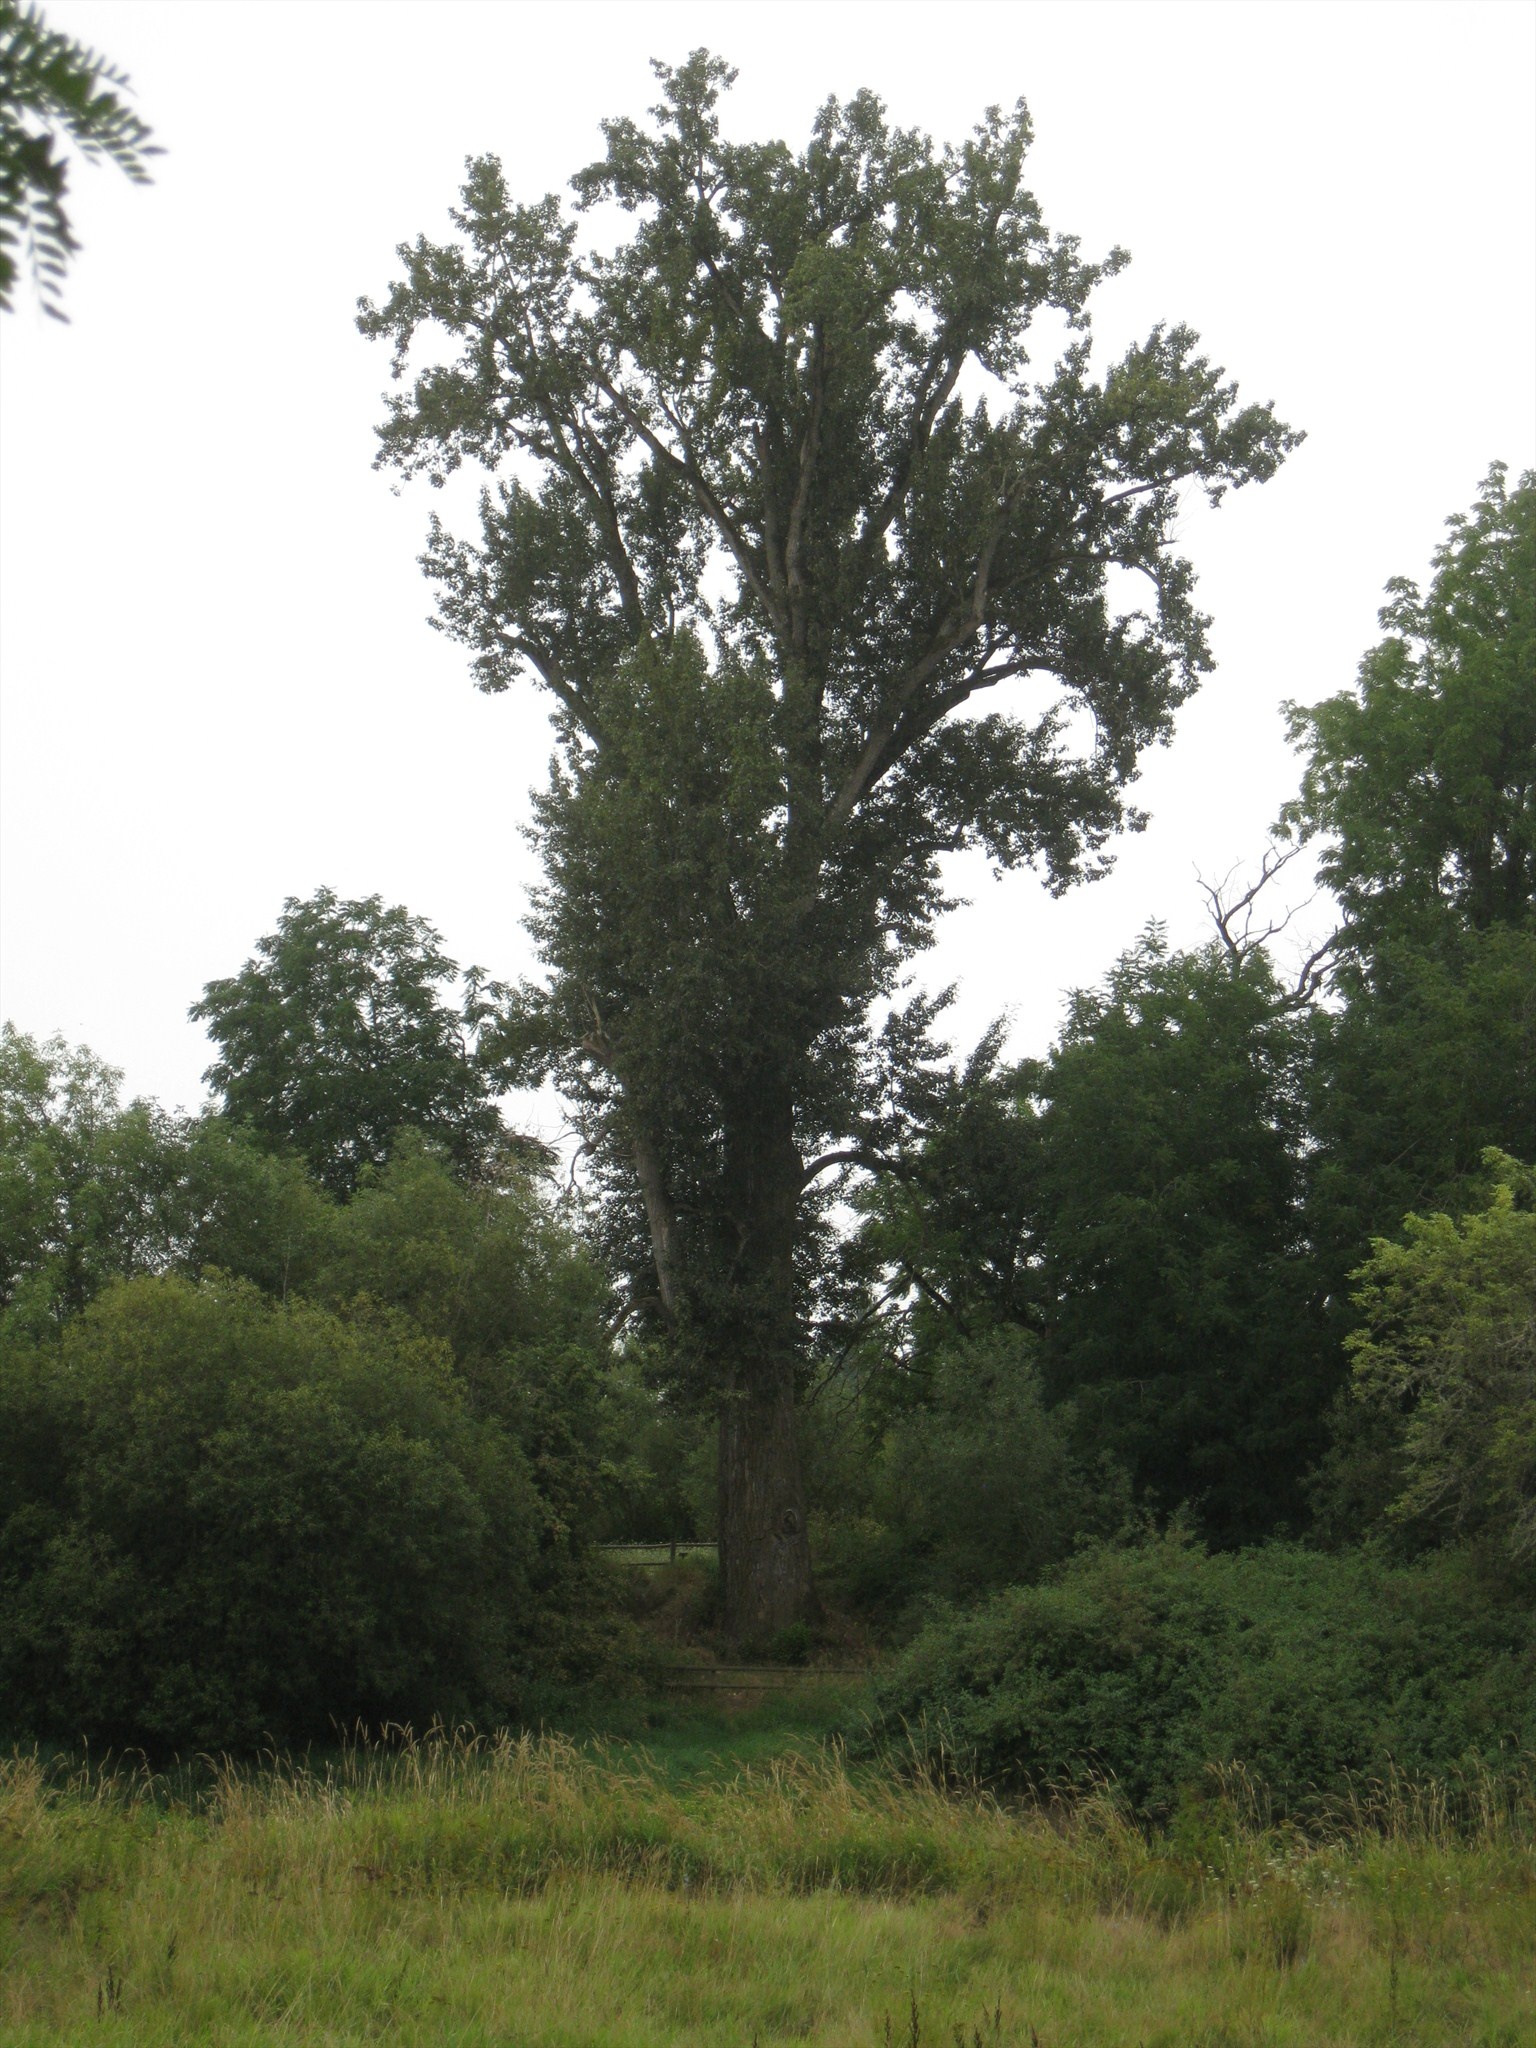 Largest black cottonwood, United States record, Marion County, Exceptional trees, 1540x2050 HD Handy